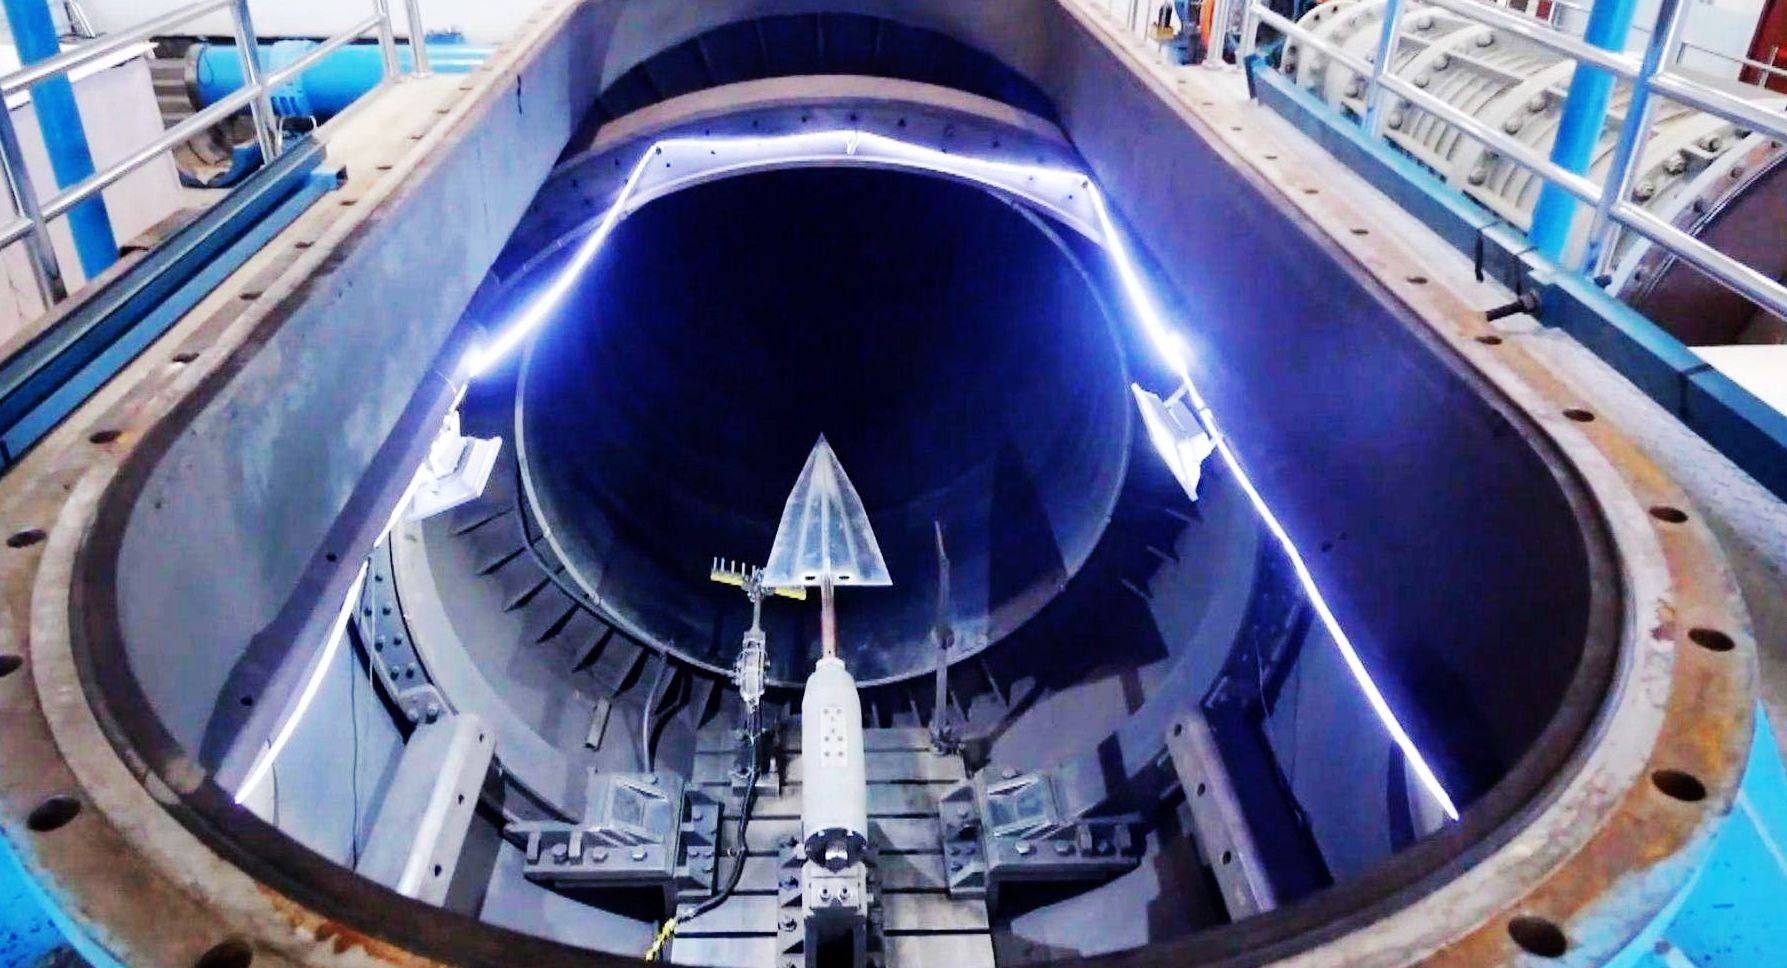 The JF12 hypersonic wind tunnel in Beijing. Photo: CCTV